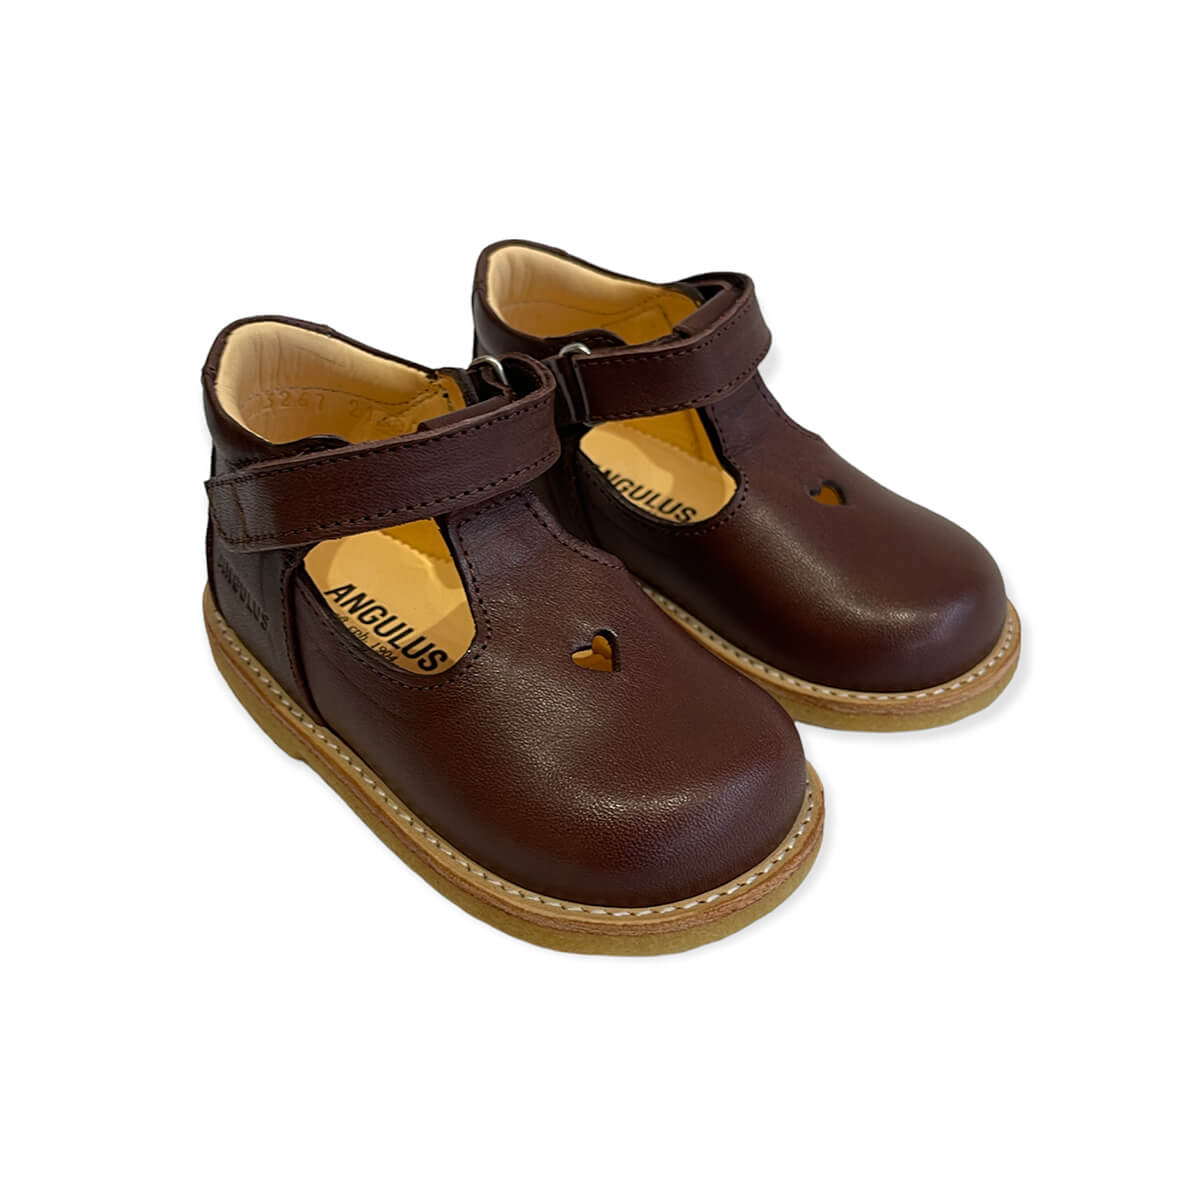 Heart T Bar Starter Mary Janes in Angulus Brown by Angulus Junior Edition